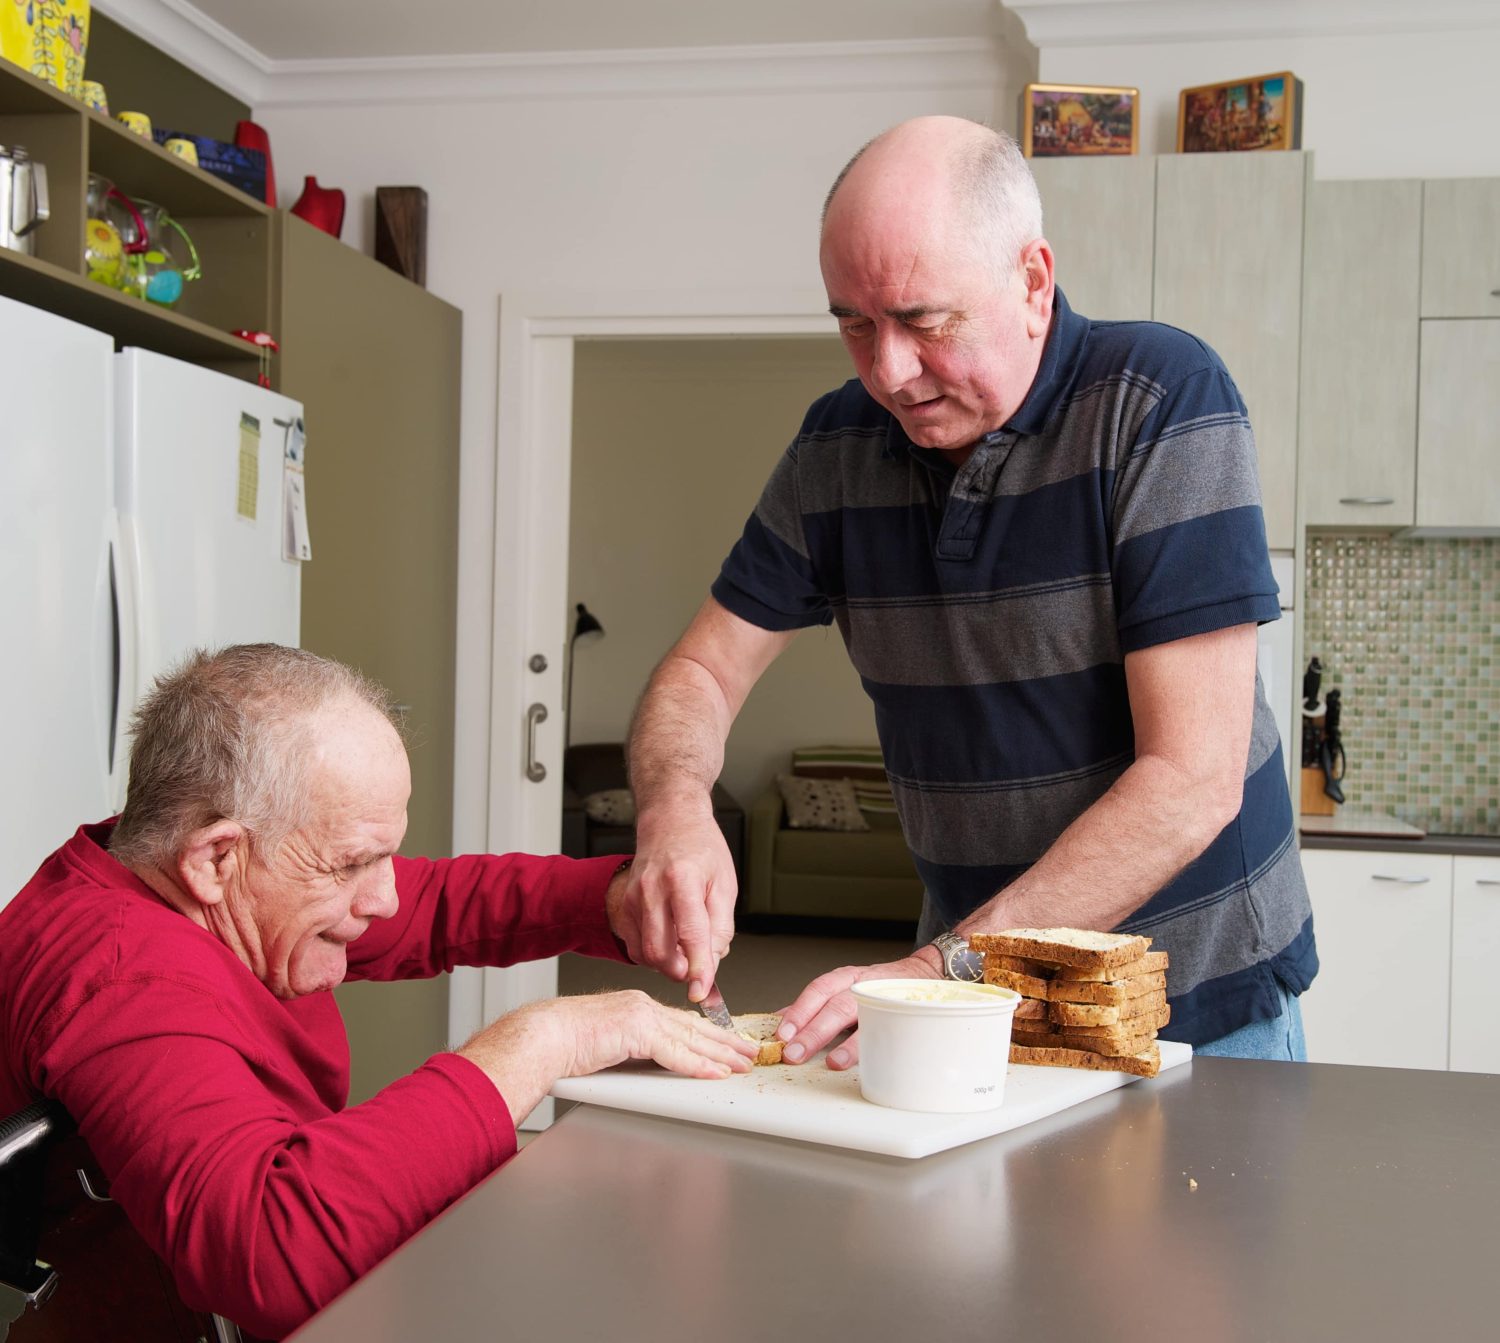 Male home Carer assisting senior Man with a Disability in a kitchen.